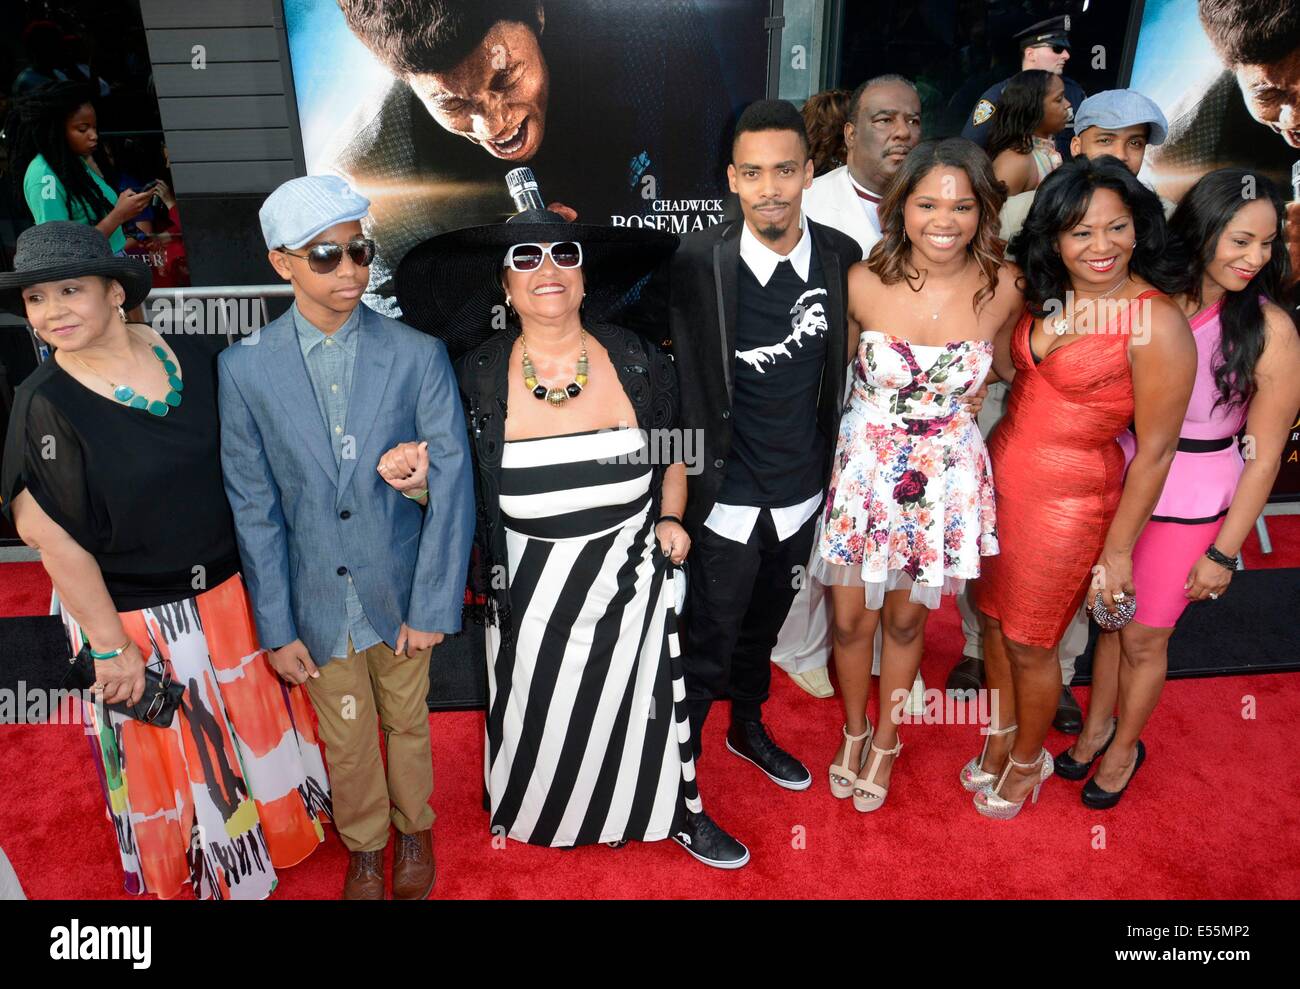 New York, NY, USA. 21st July, 2014. Dede Brown and James Brown's family at arrivals for GET ON UP Premiere, Apollo Theater, New York, NY July 21, 2014. Credit:  Derek Storm/Everett Collection/Alamy Live News Stock Photo